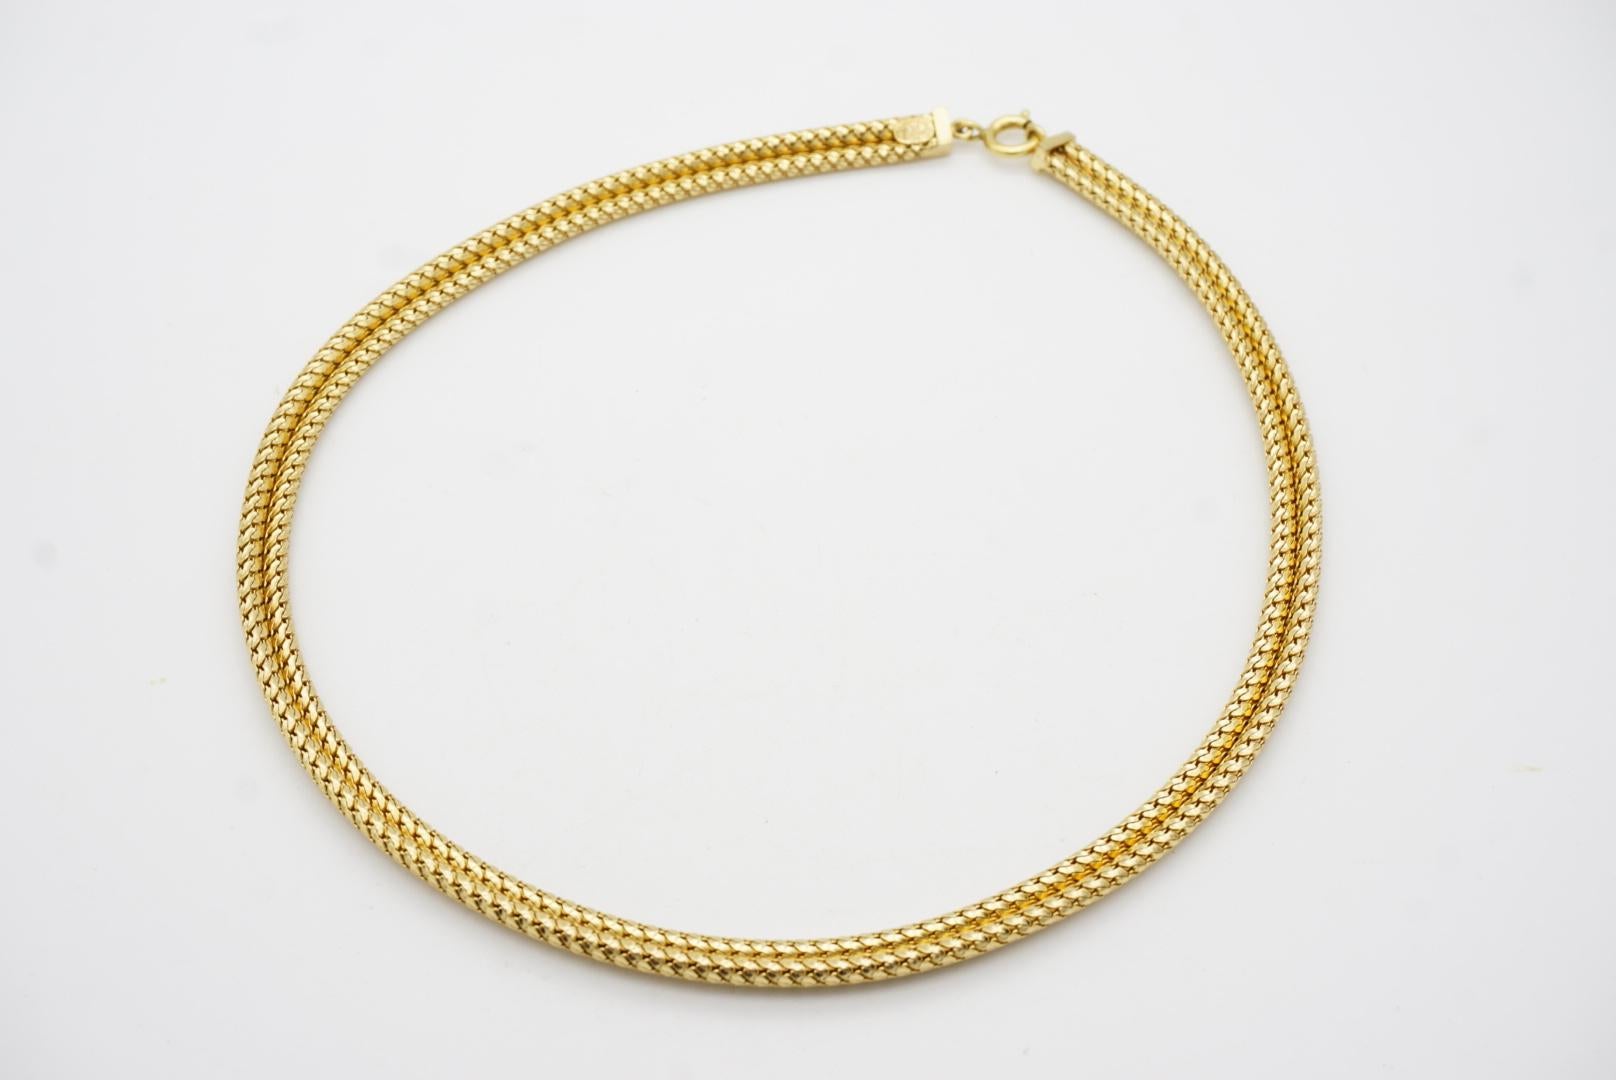 Christian Dior GROSSE 1965 Herringbone Classic Curb Woven Chain Rope Necklace 7